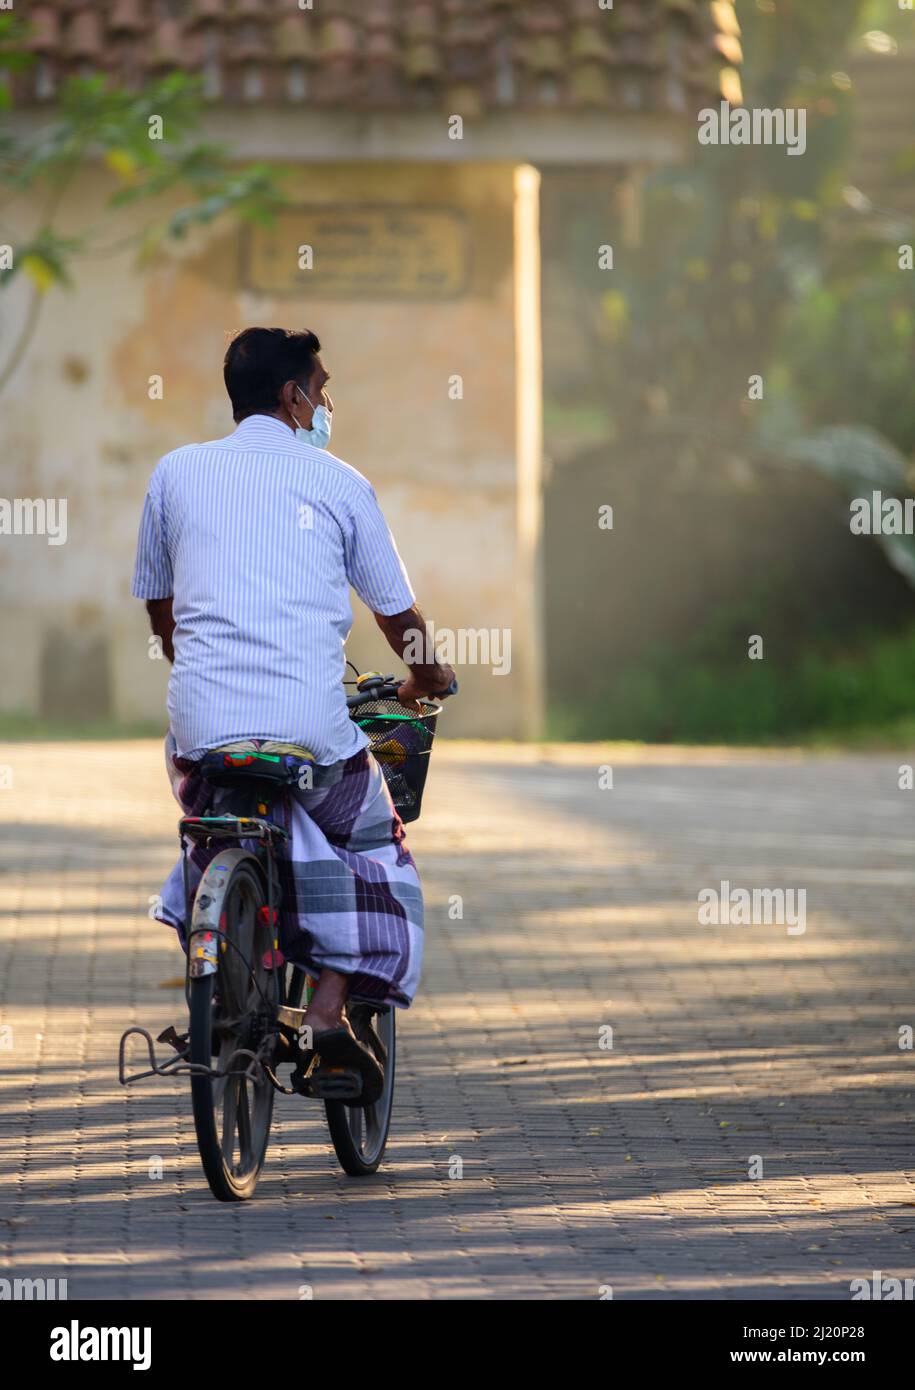 Galle, Sri Lanka - 02 26 2022: Concept of everyday life in Sri Lanka, Elderly ride away in a bicycle, early in the morning, Stock Photo